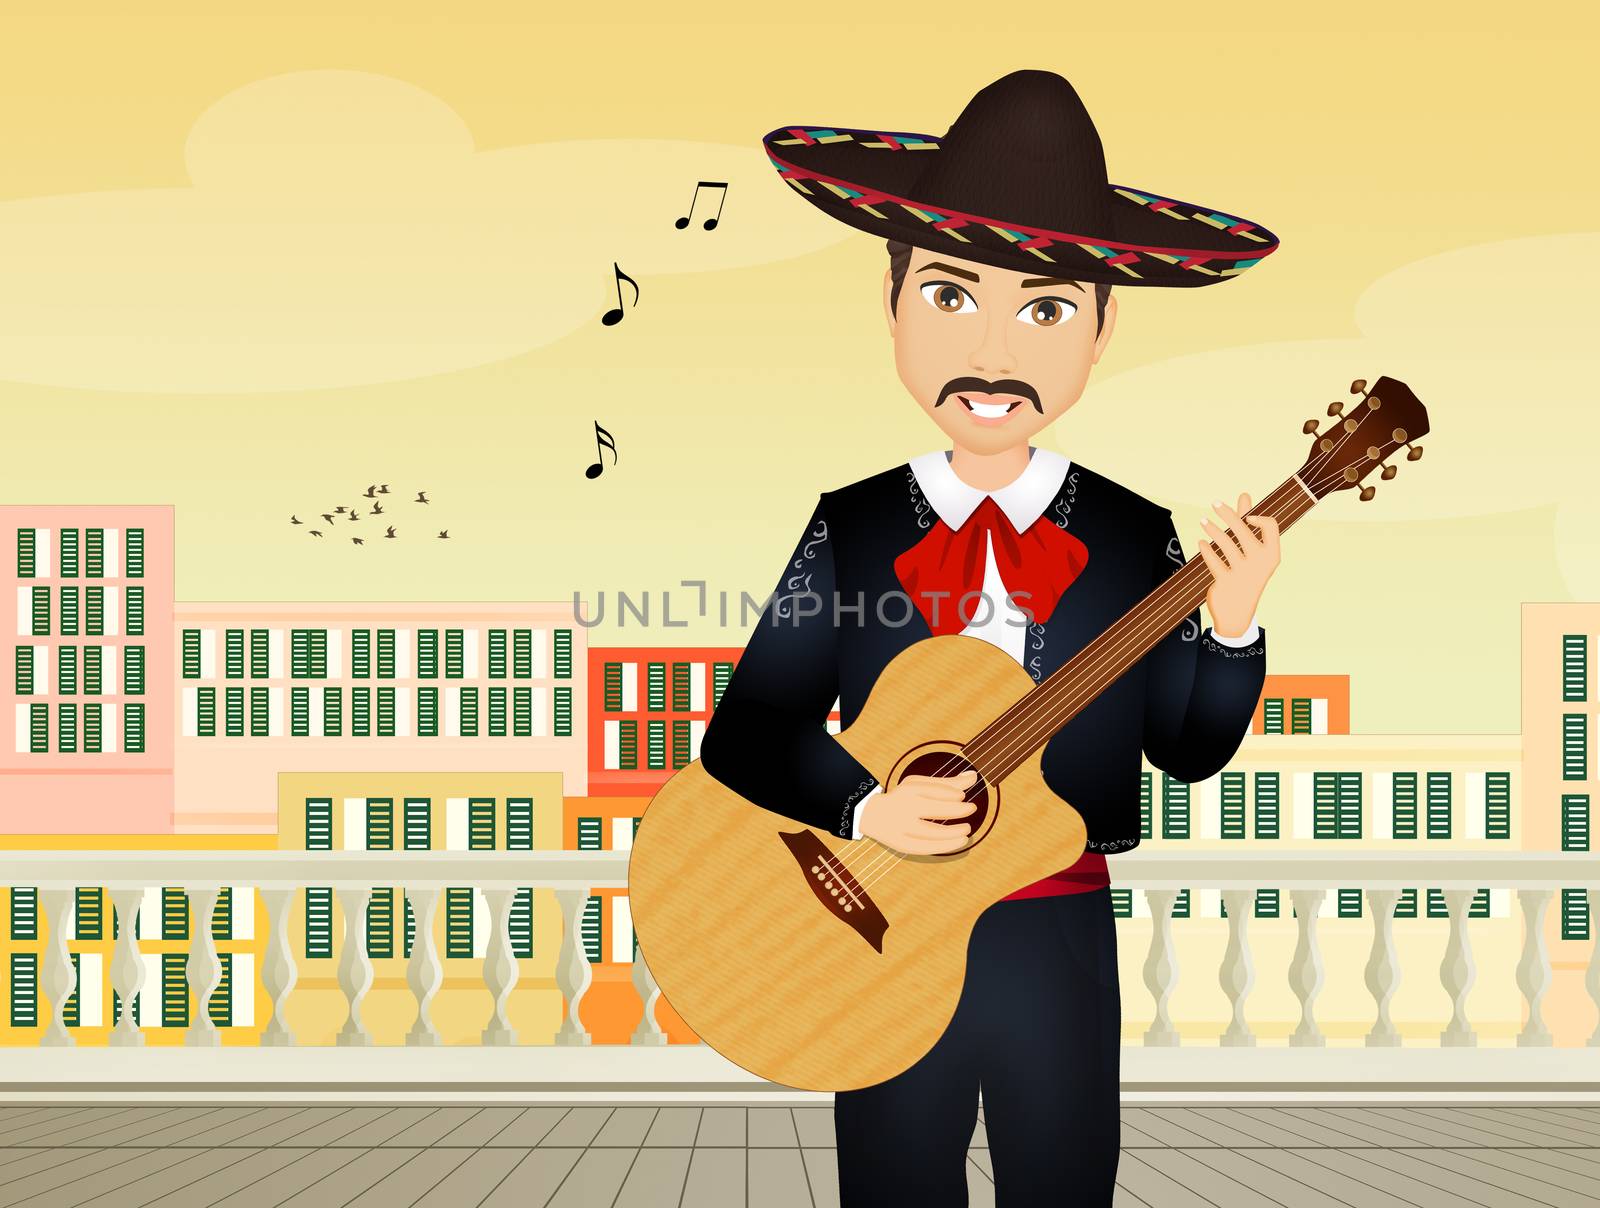 Mariachi with guitar by adrenalina